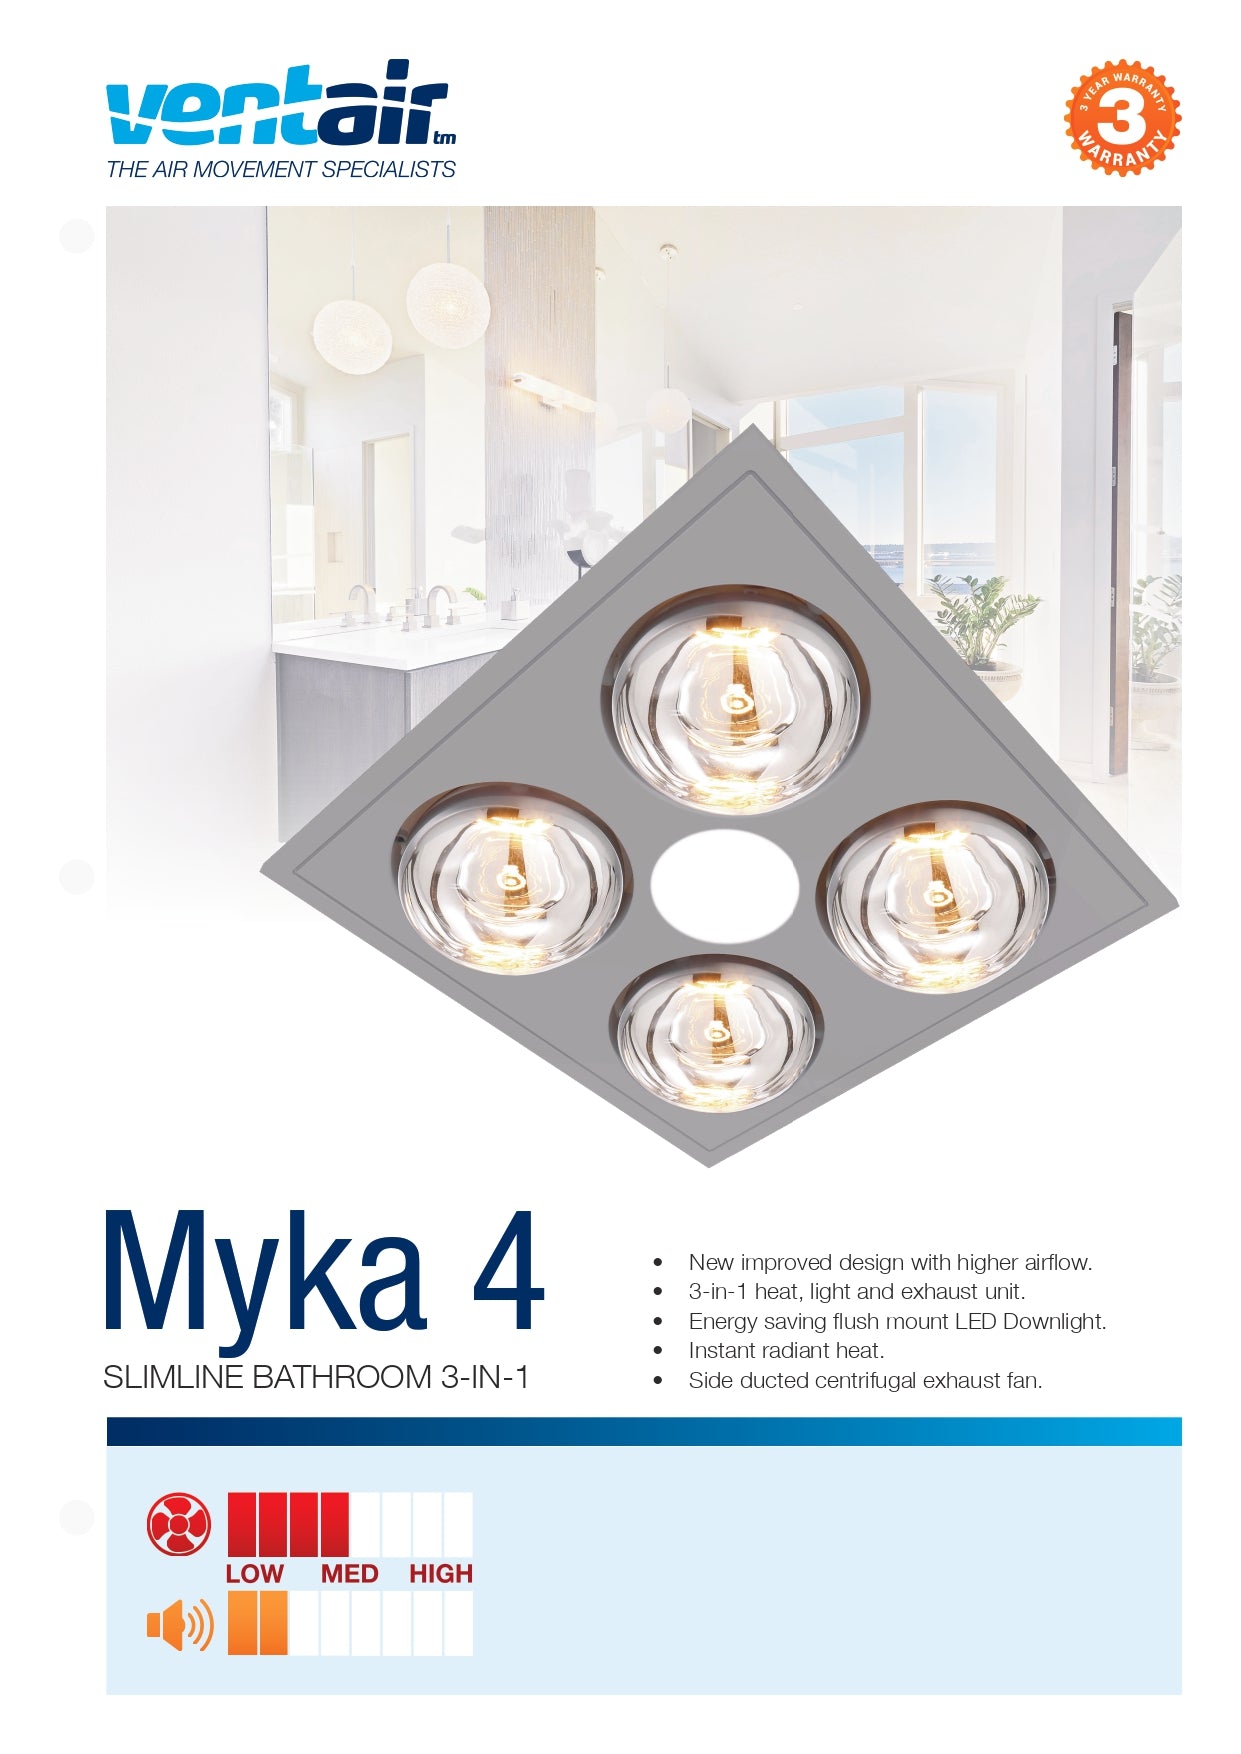 VENTAIR MYKA 4 SLIMLINE 3 IN 1 WITH 4 HEAT LAMPS, LED DOWNLIGHT AND SIDE DUCTED EXHAUST SILVER